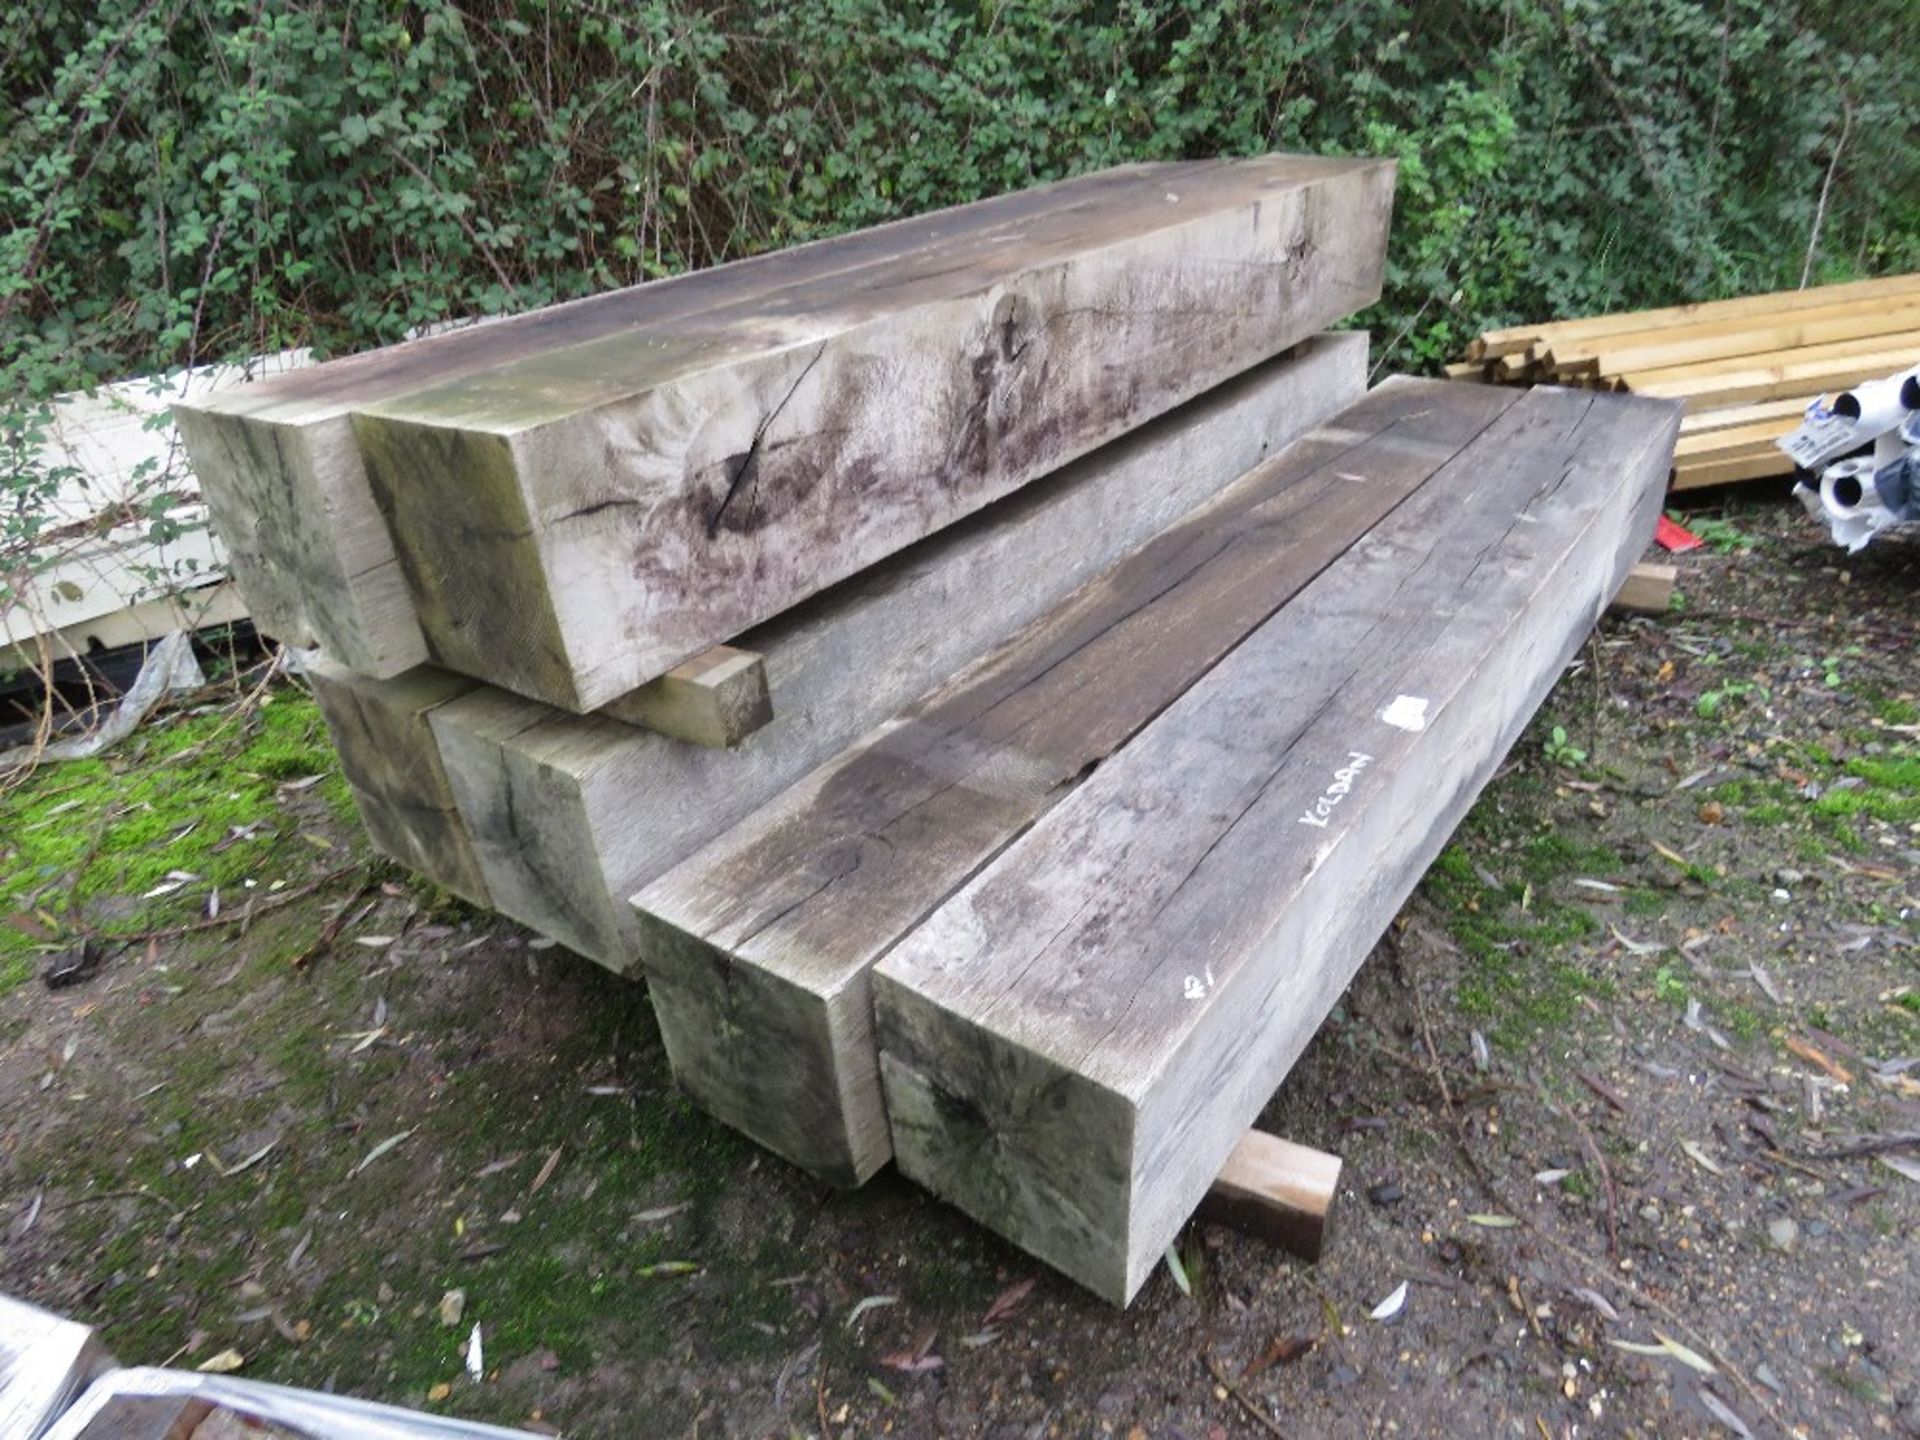 STACK OF 6NO HEAVY TIMBER POSTS, VERY HEAVY, POSSIBLY OAK. 20CM X 30CM X 2.26M LENGTH APPROX. IDEAL